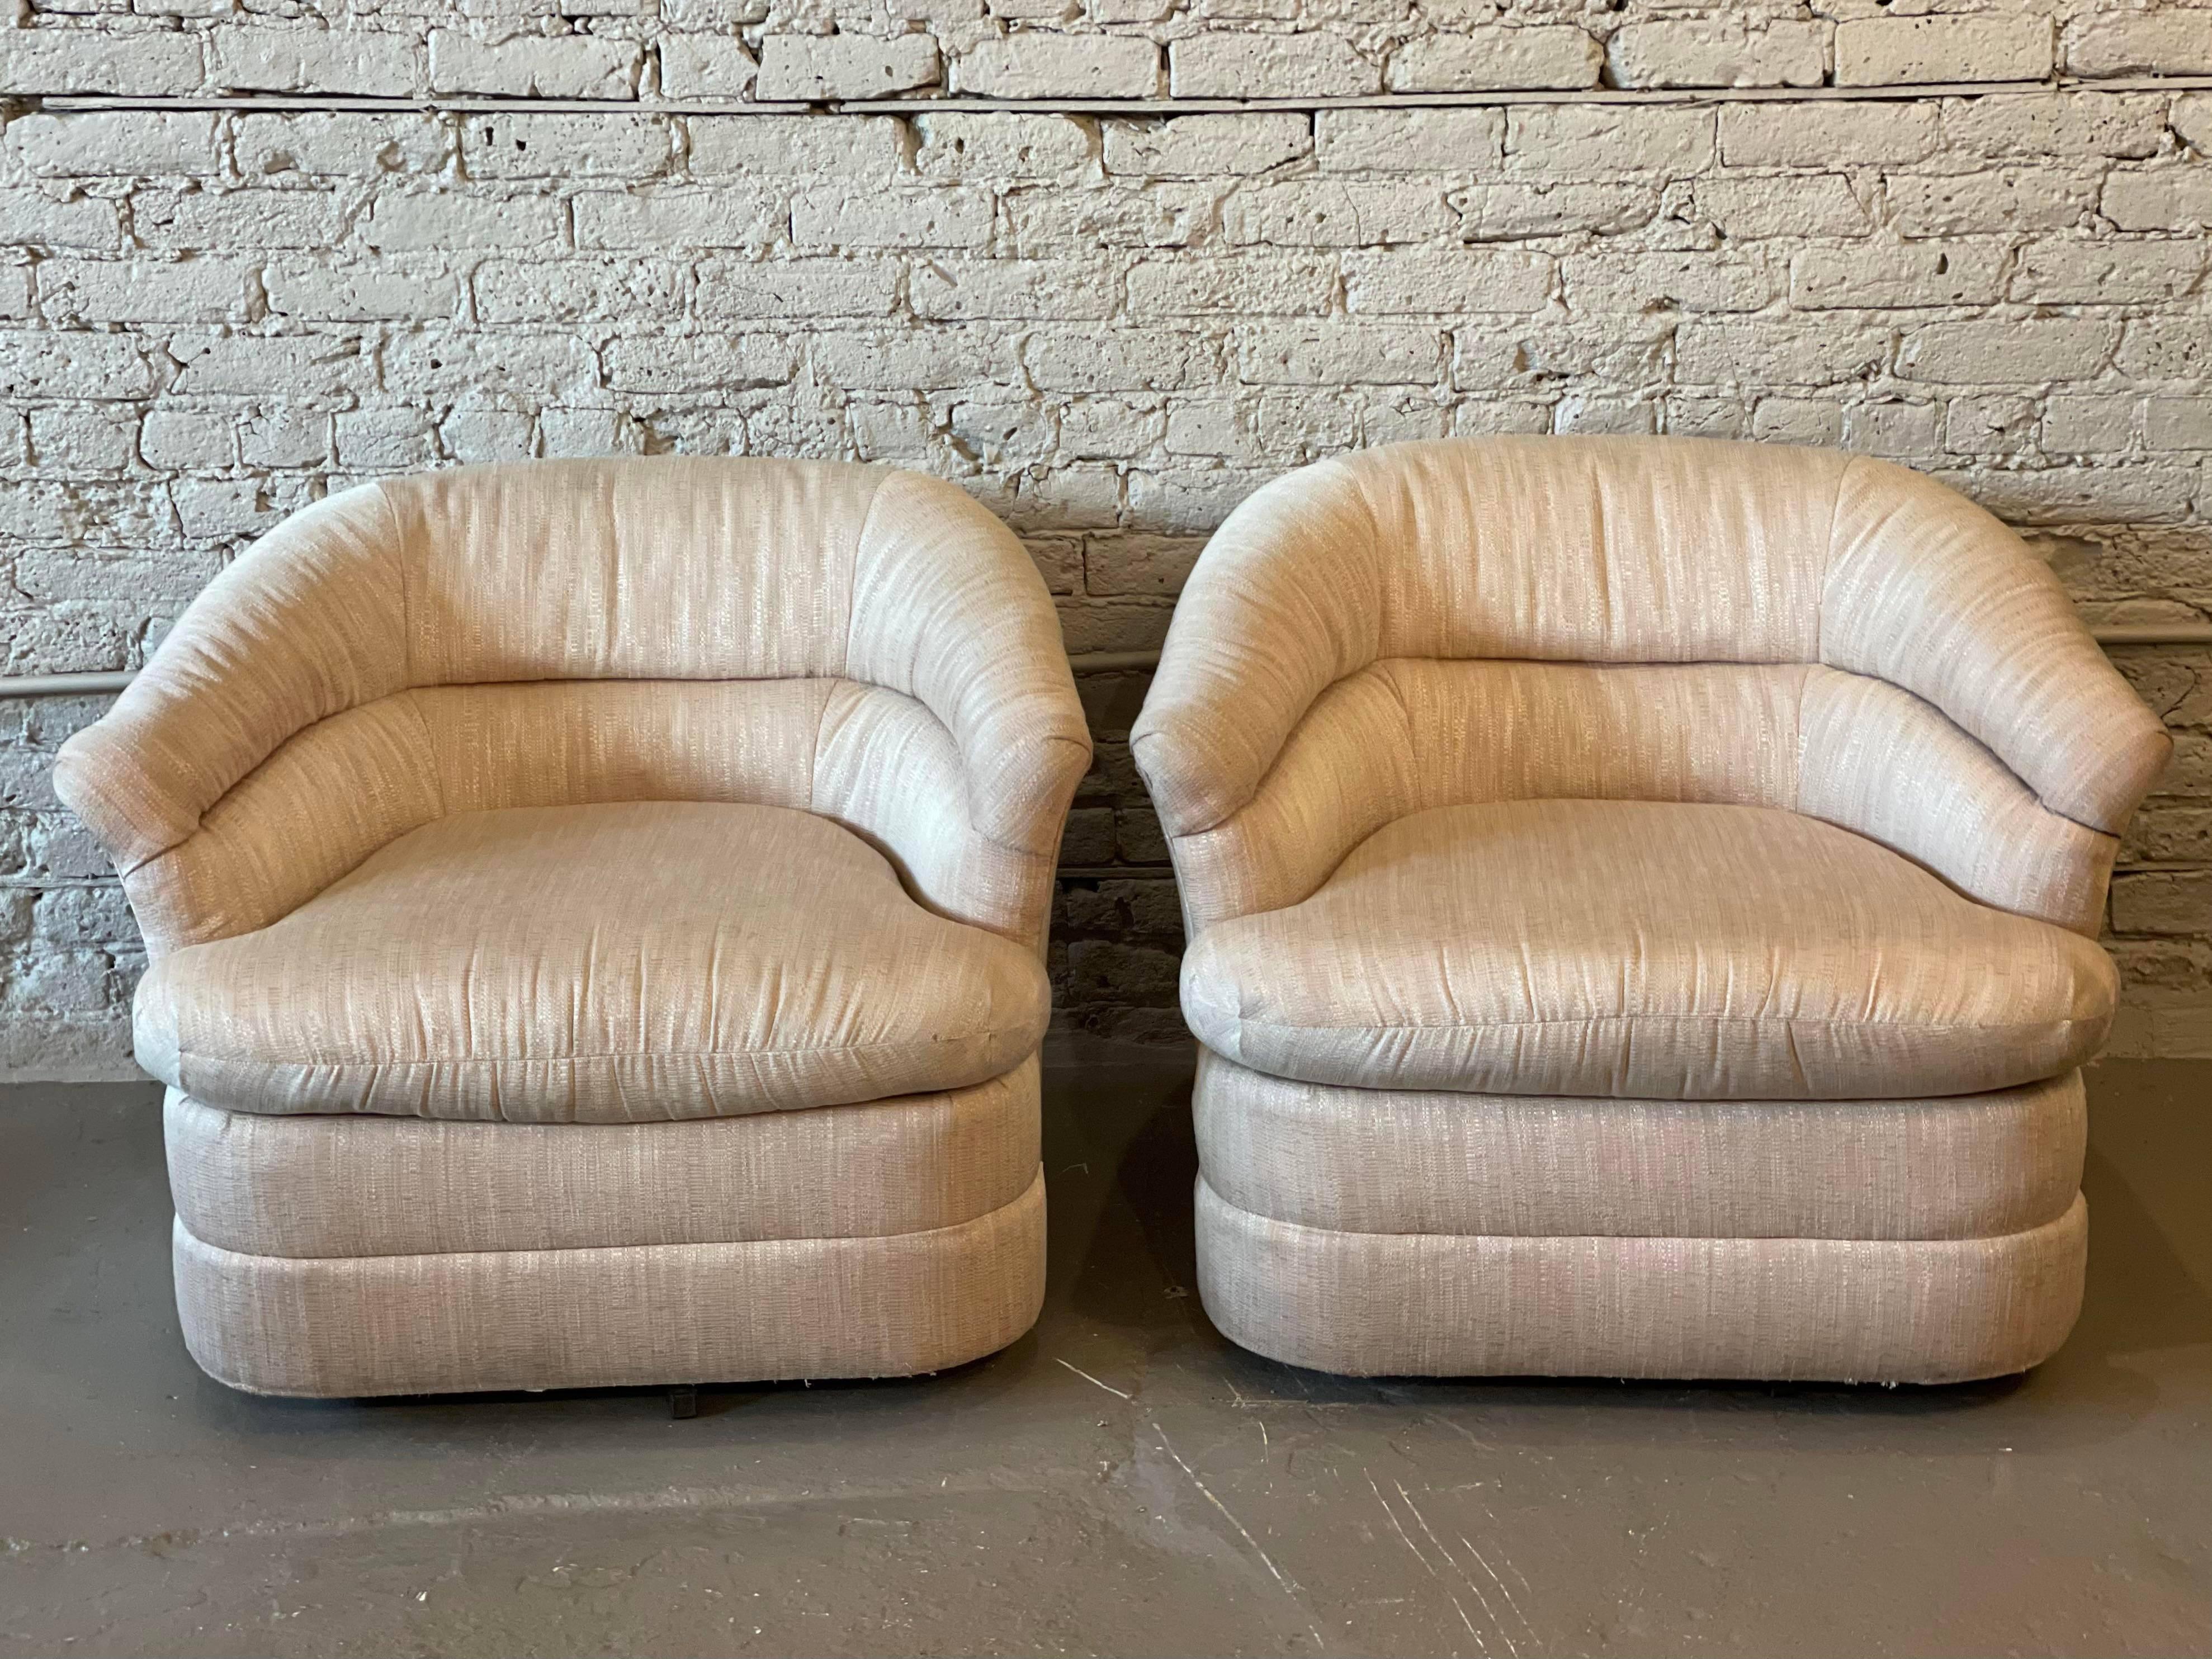 Great swivel chairs that rotate 360 degrees. They are in excellent condition with original upholstery. Use as is or redo.

Dimensions: 35